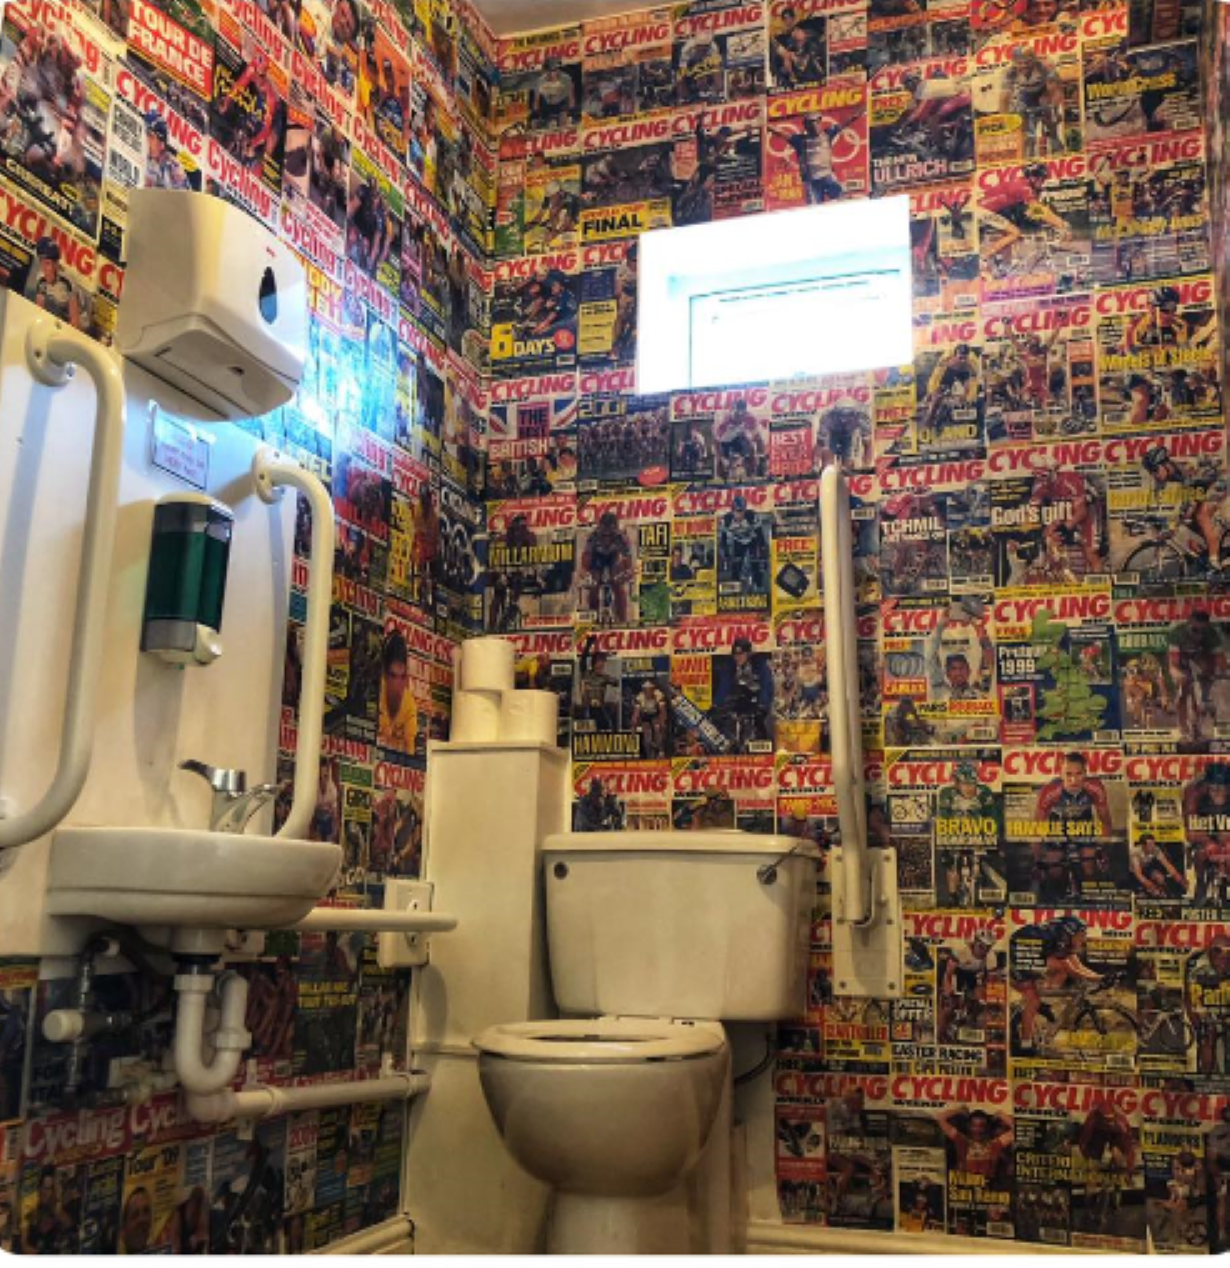 A toilet in a cafe the walls of which have been decorated with magazine pictures